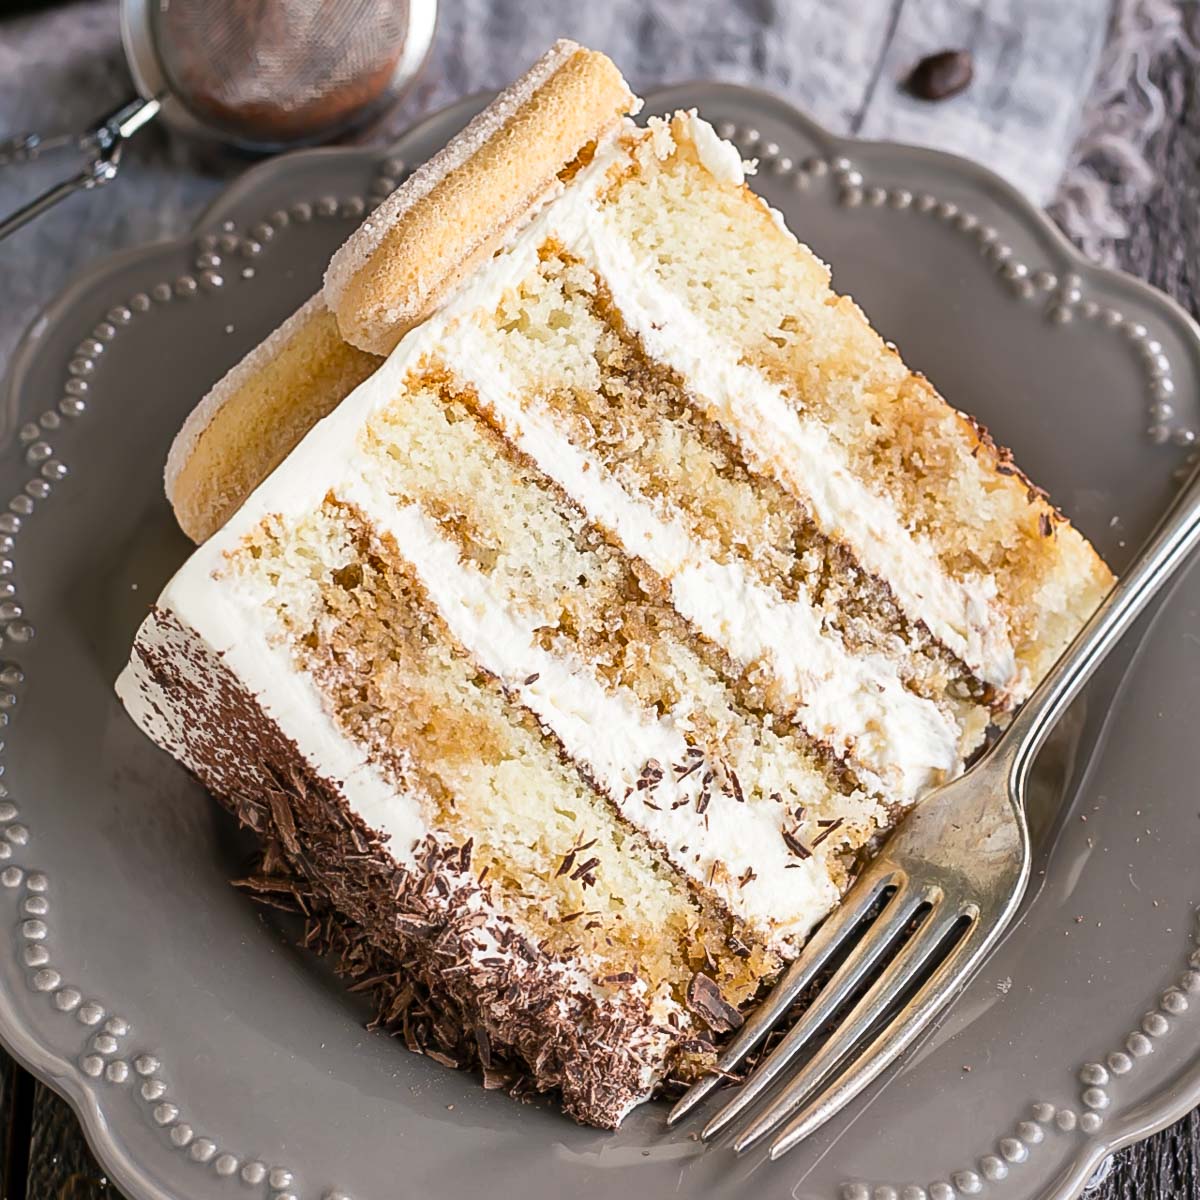 Low Carb Italian Cream Cake - All Day I Dream About Food